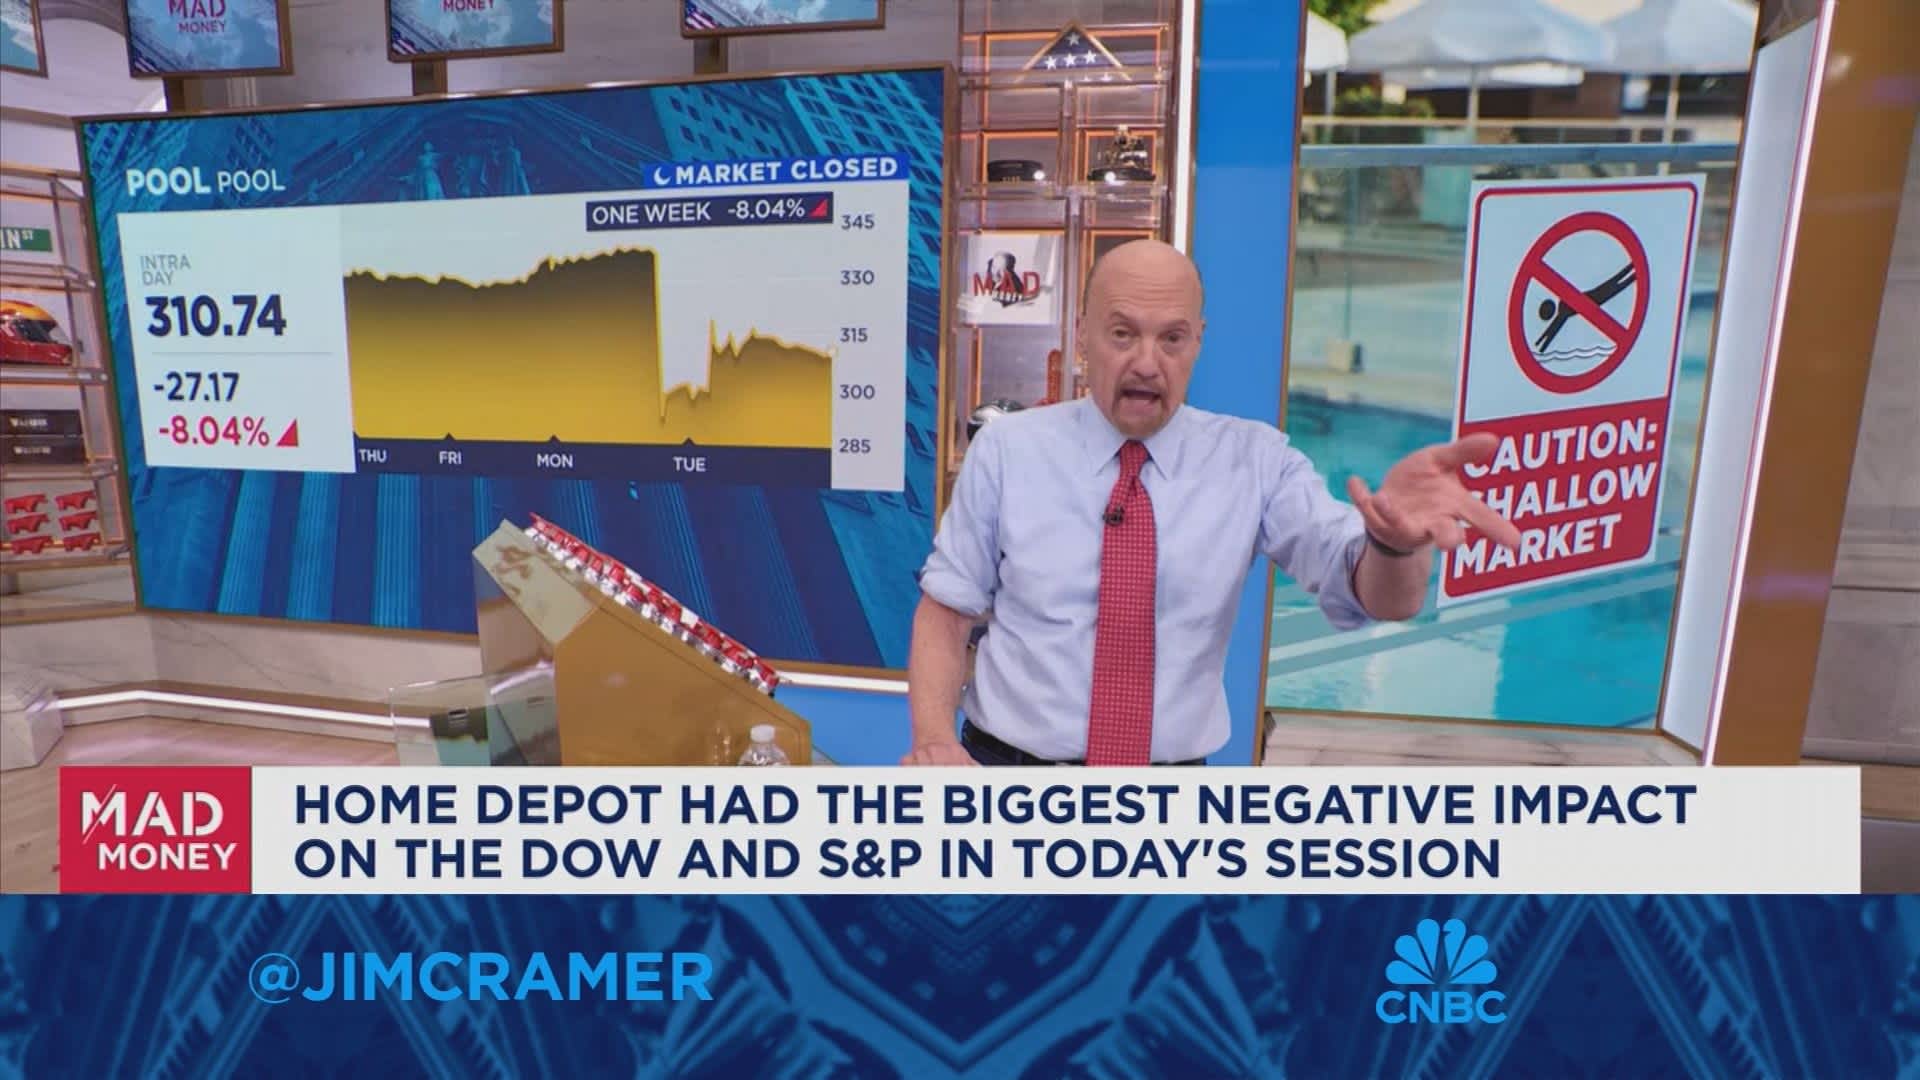 Pool Corp. went down in the deep end and blamed the consumer, says Jim Cramer